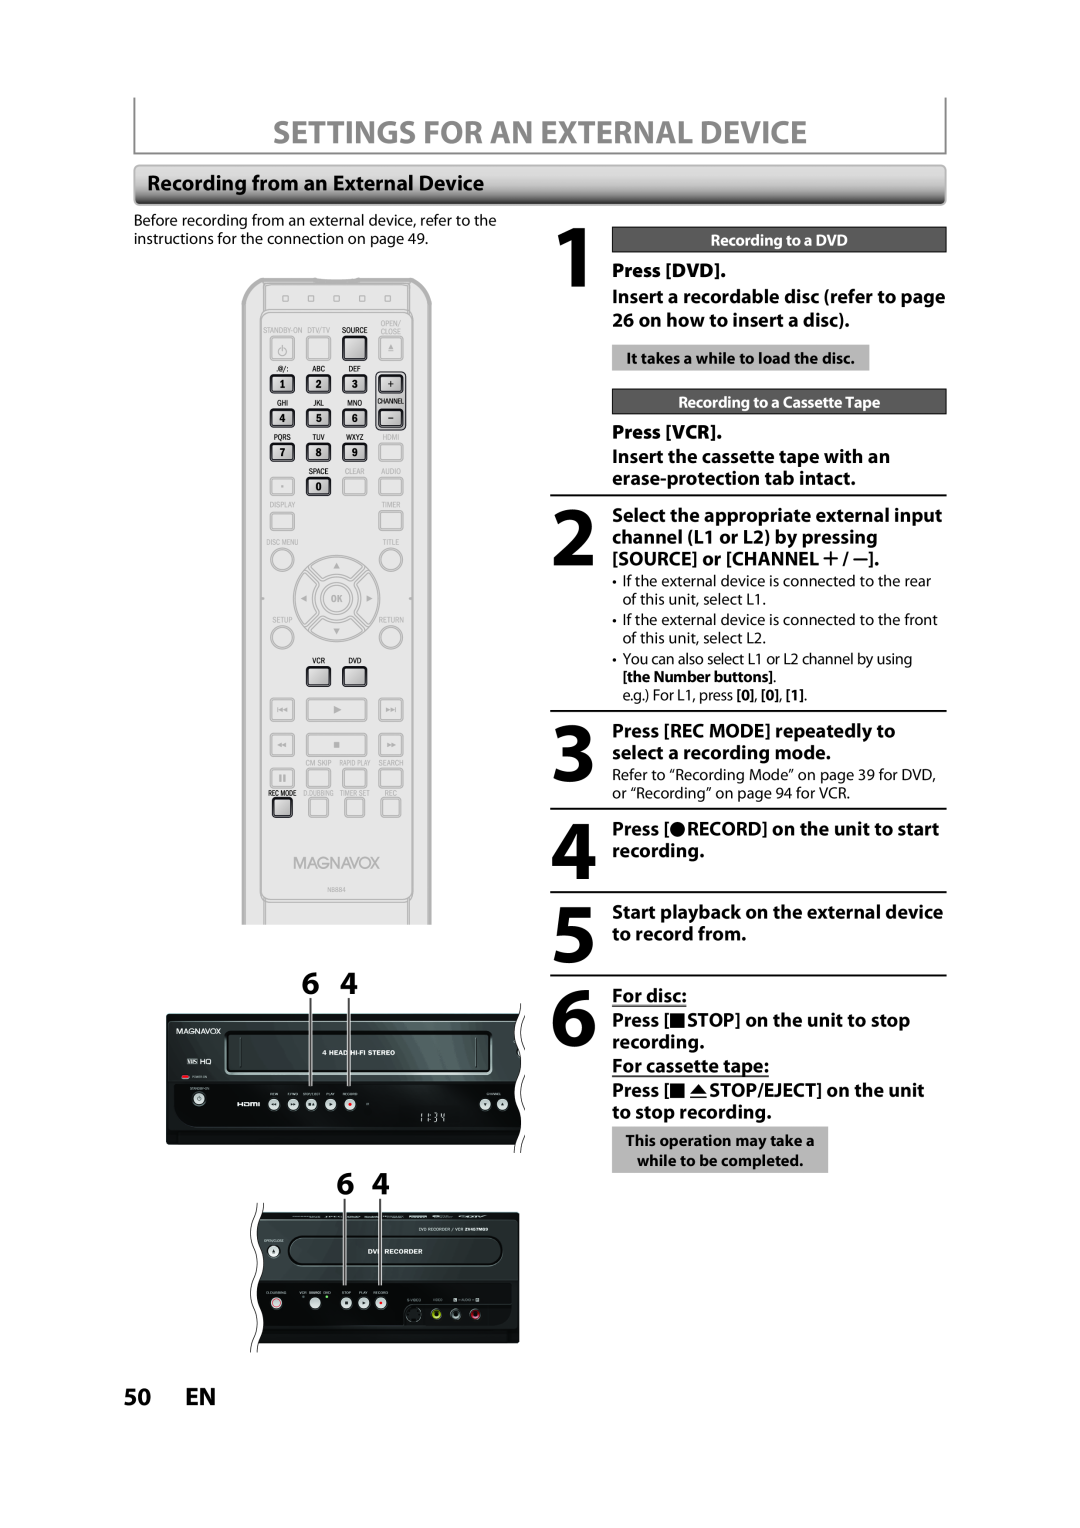 FUNAI ZV457MG9 A owner manual Settings For An External Device, 50 EN, Recording from an External Device, Press VCR 